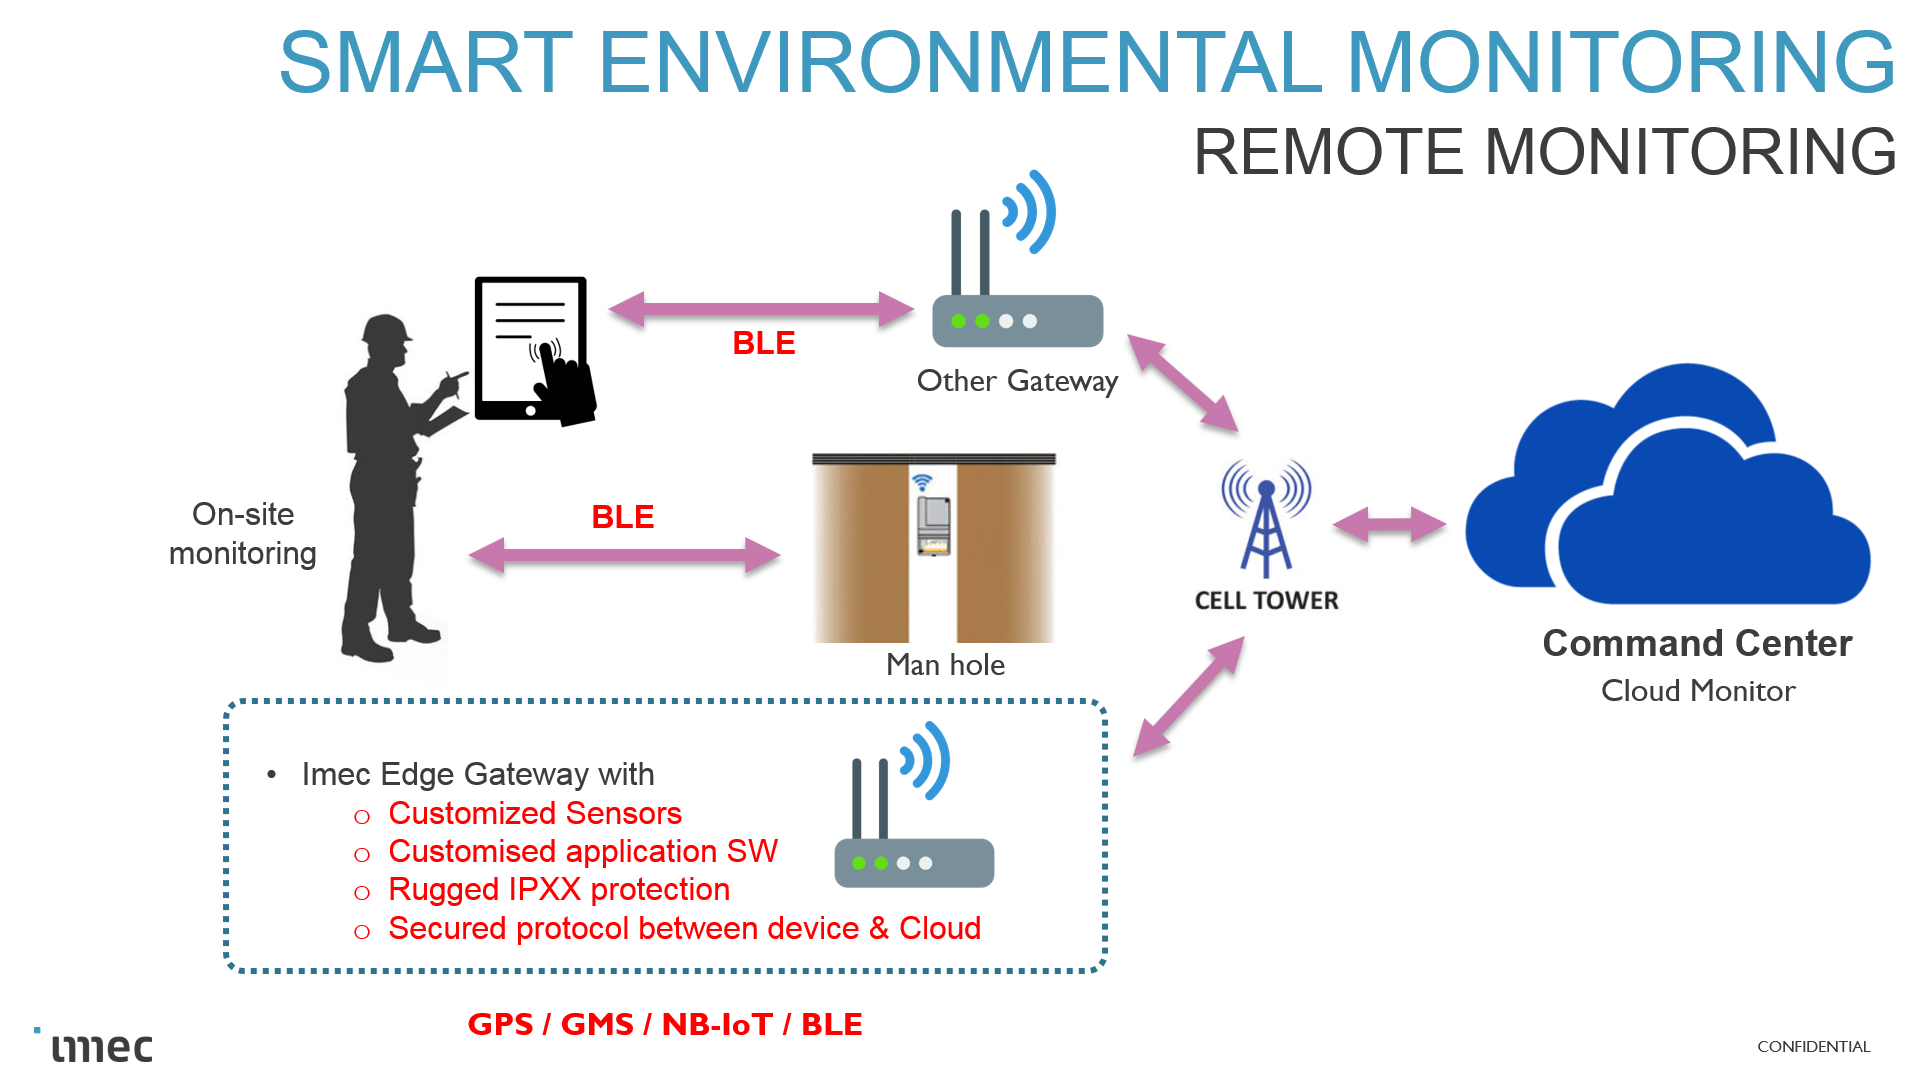 Offering of Full Turn Key Solutions -- Wireless IoT Gateway for Remote Enviromental Monitoring